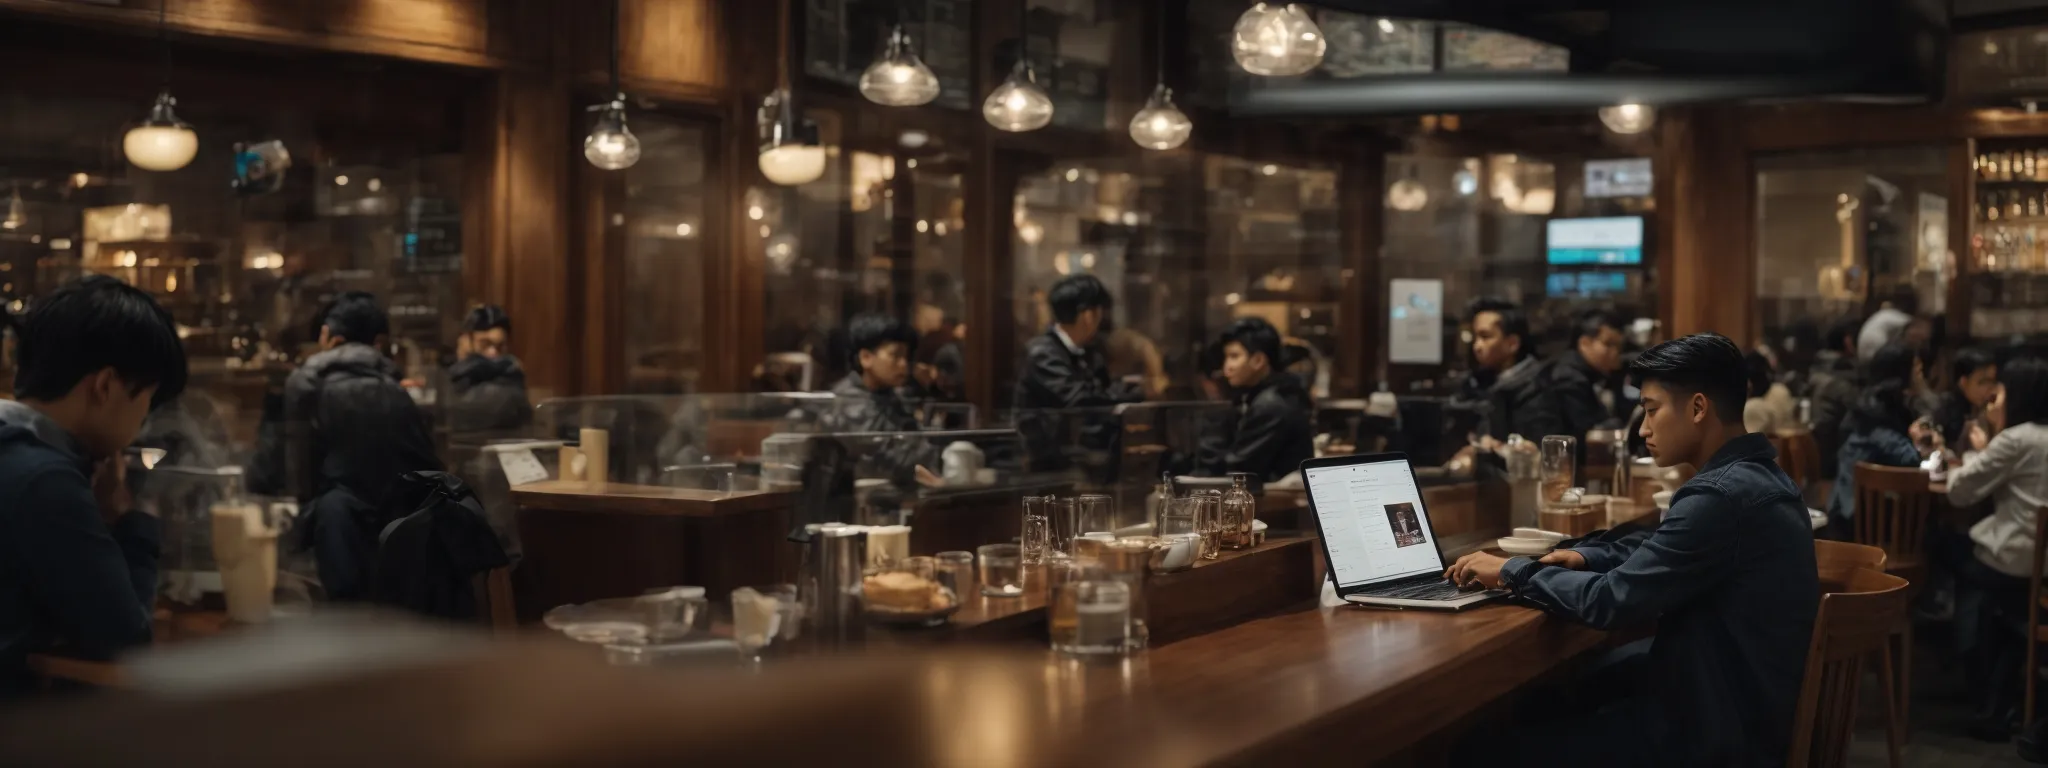 a person sits in a bustling café, intently studying a laptop screen with various social media analytics, while others around casually engage with their smartphones.